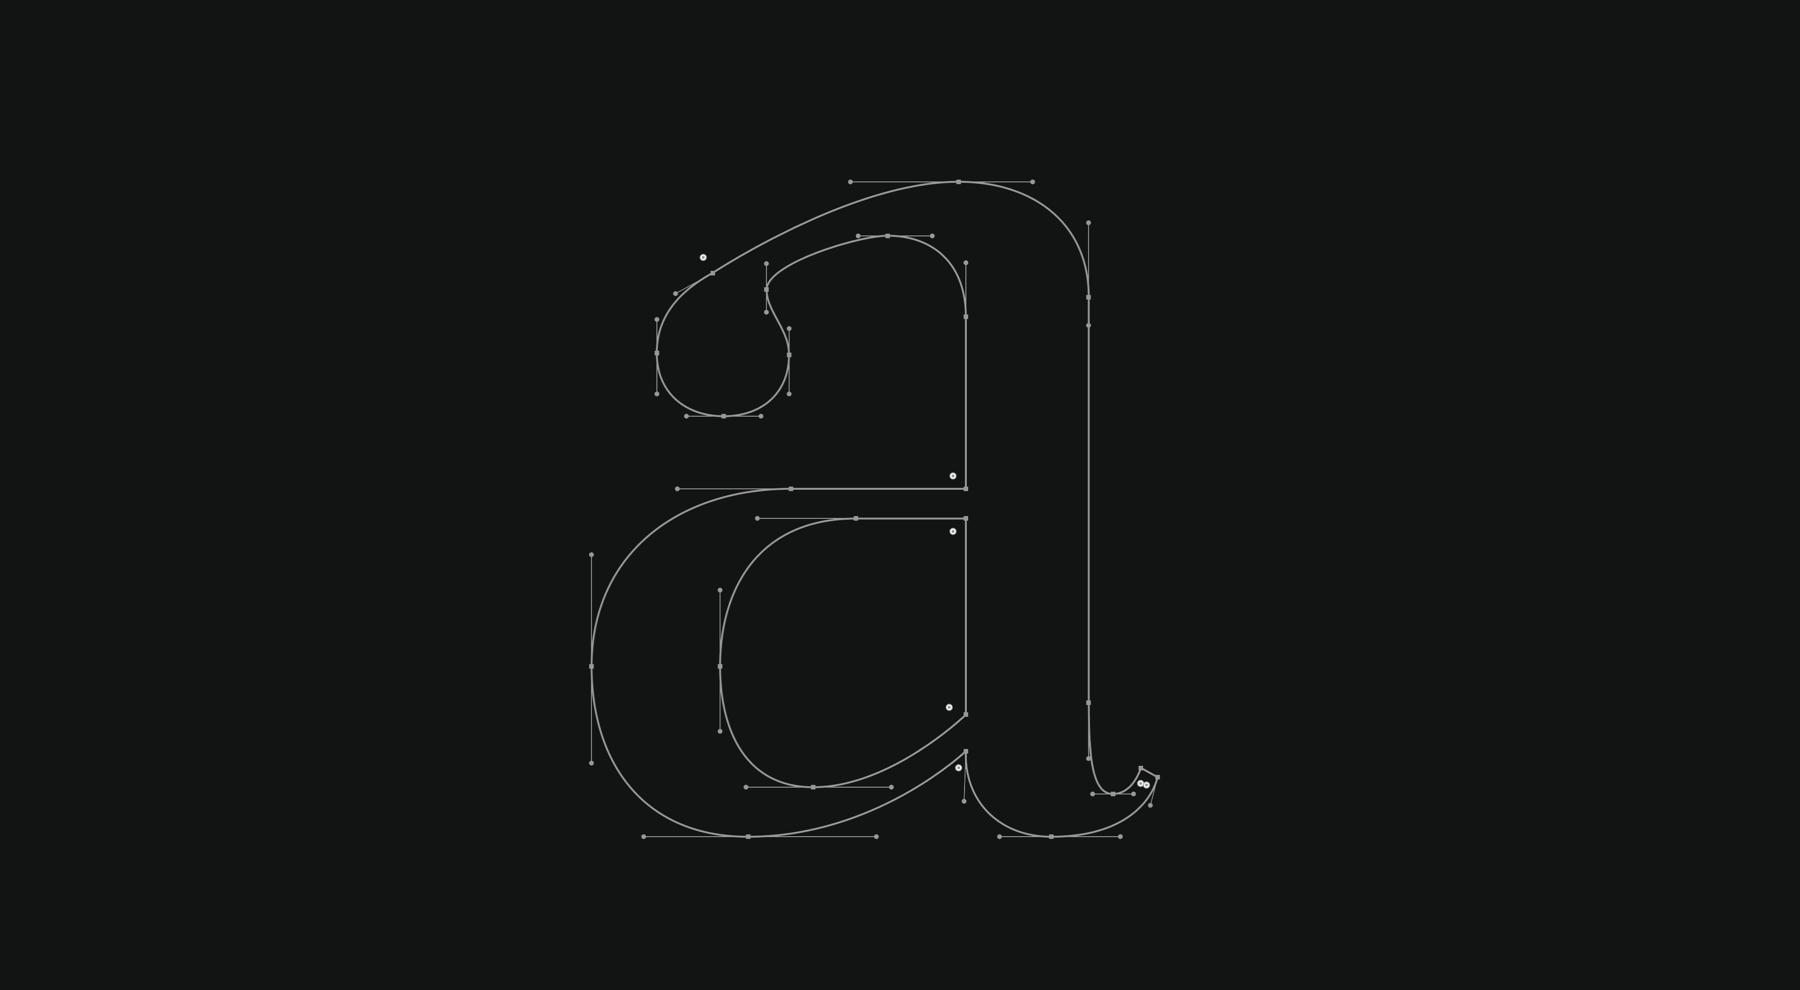 Annota anchors and handles in Illustrator